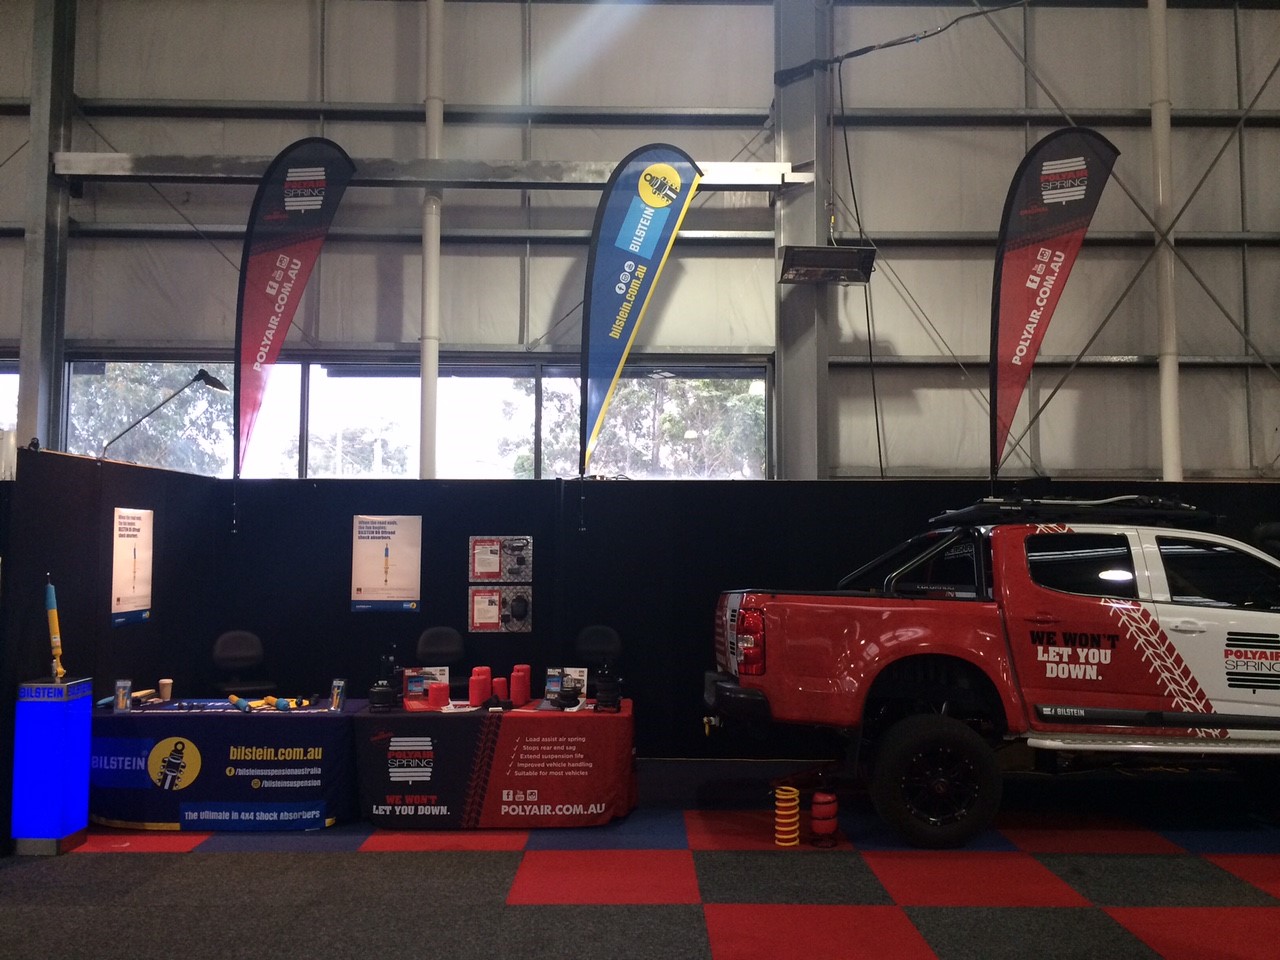 Visit Polyair at the Melbourne National 4x4 & Outdoors Show! 21-23 AUG